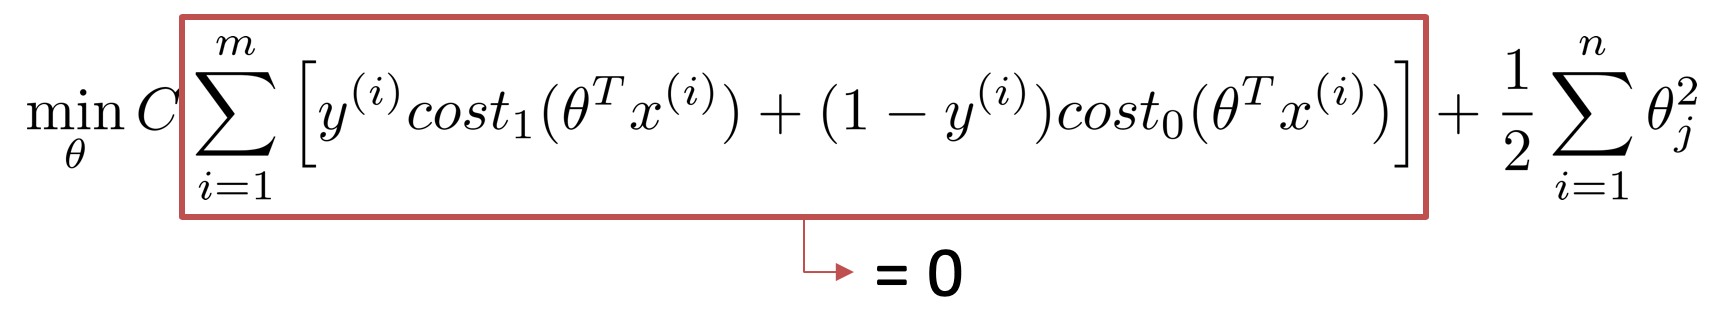 SVM_Cost function2